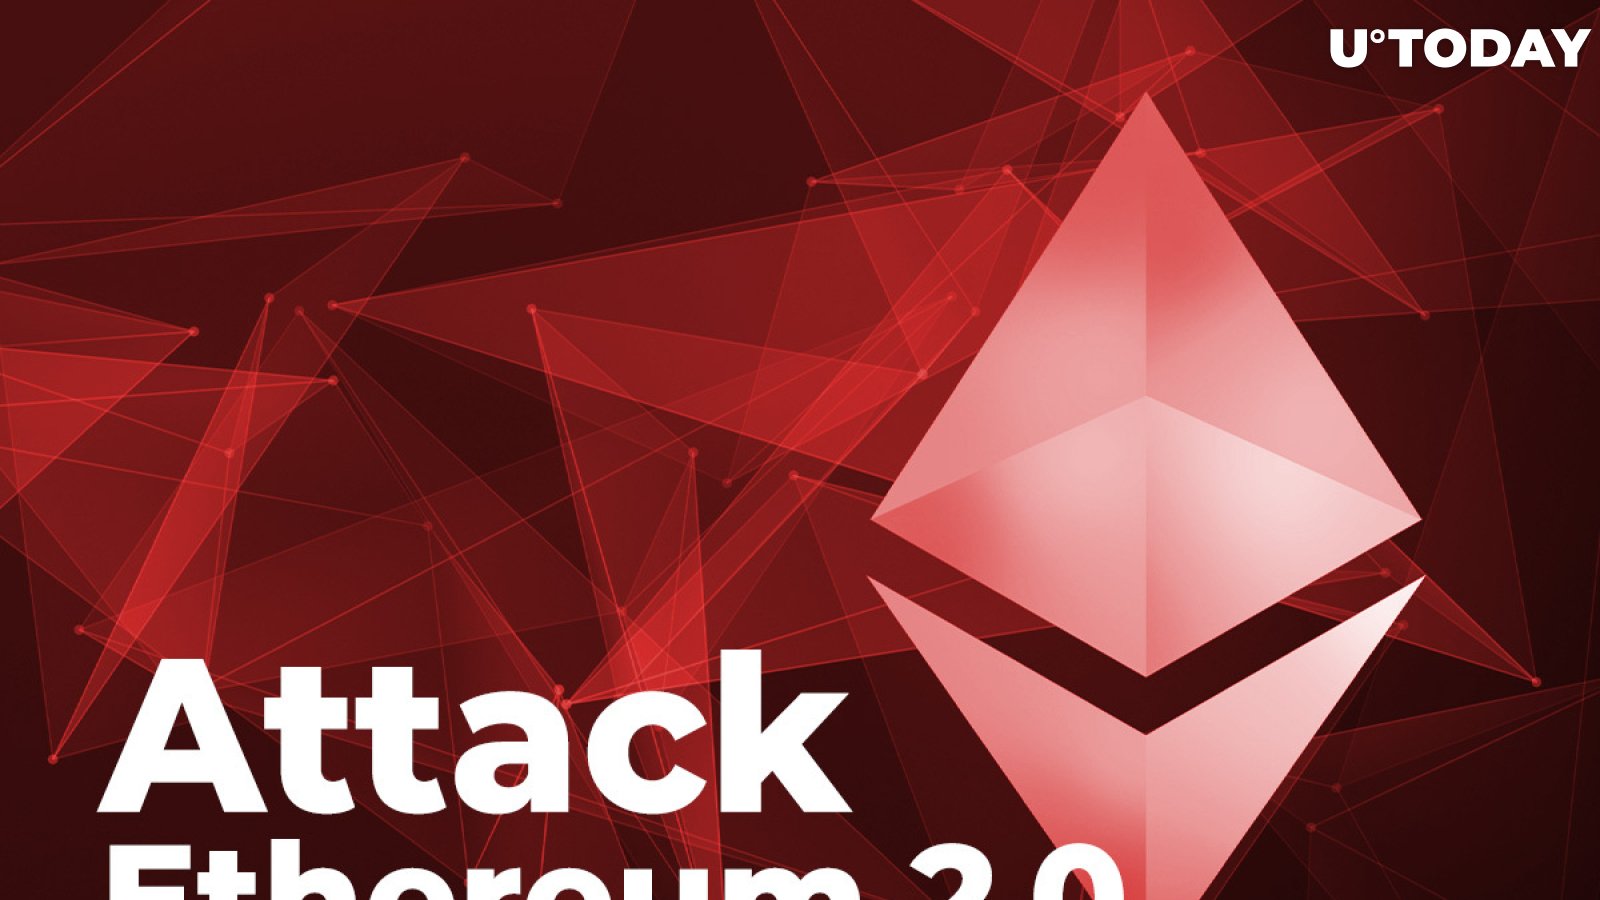 How Much Does It Cost to Attack Ethereum 2.0? Scientists Answer